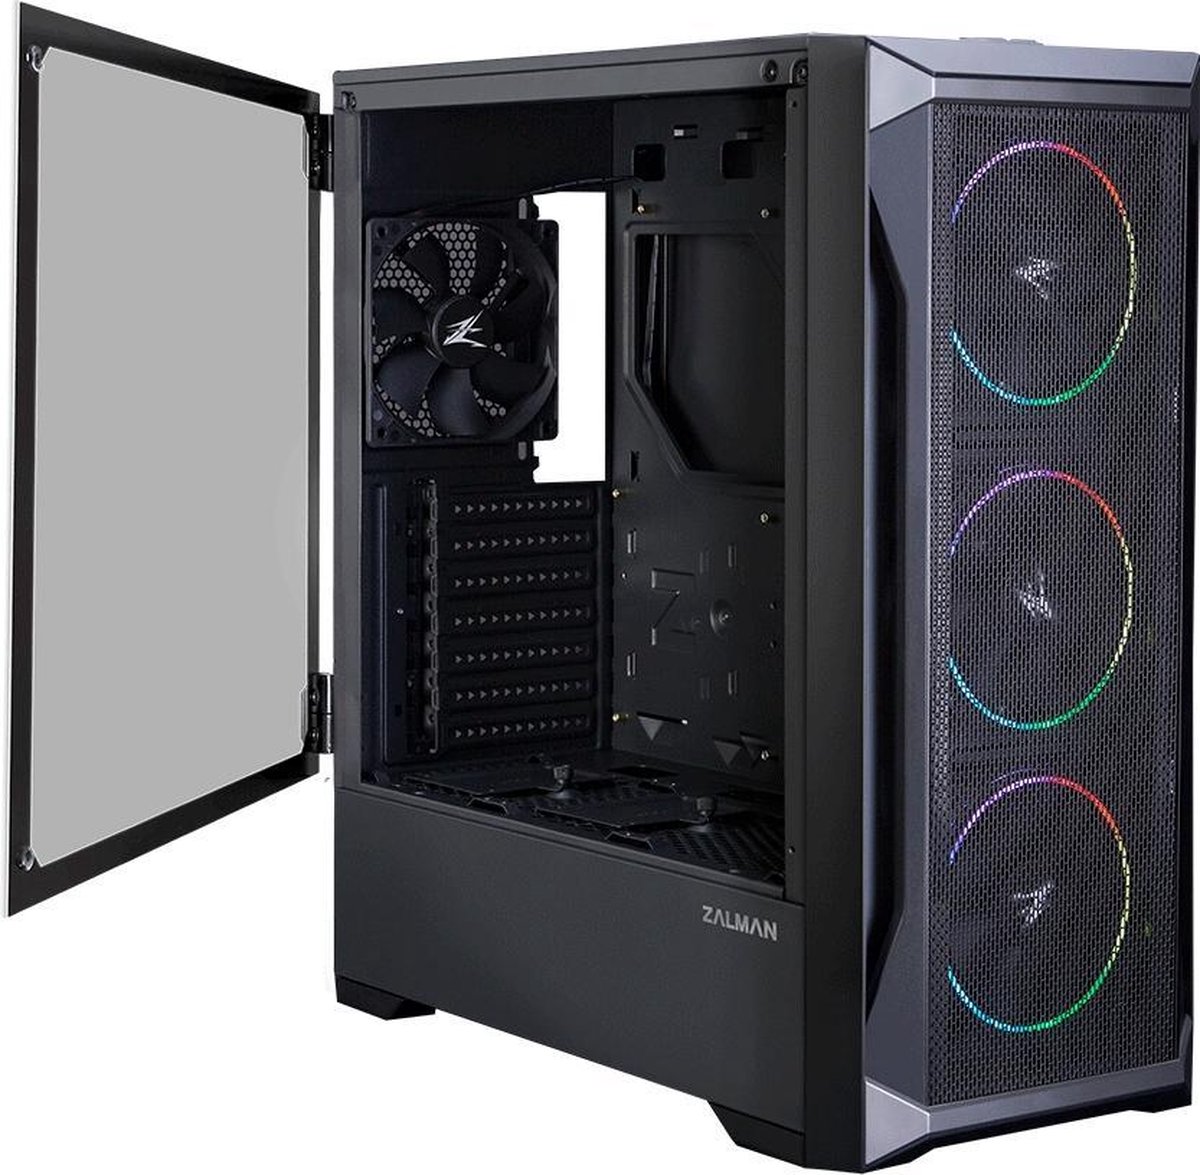 Zalman Z8 MS ATX Mid Tower PC Case, ARGB fan front 3 x 120 mm, 1 x rear 120 mm, Mesh Front, Tempered Glass side panel